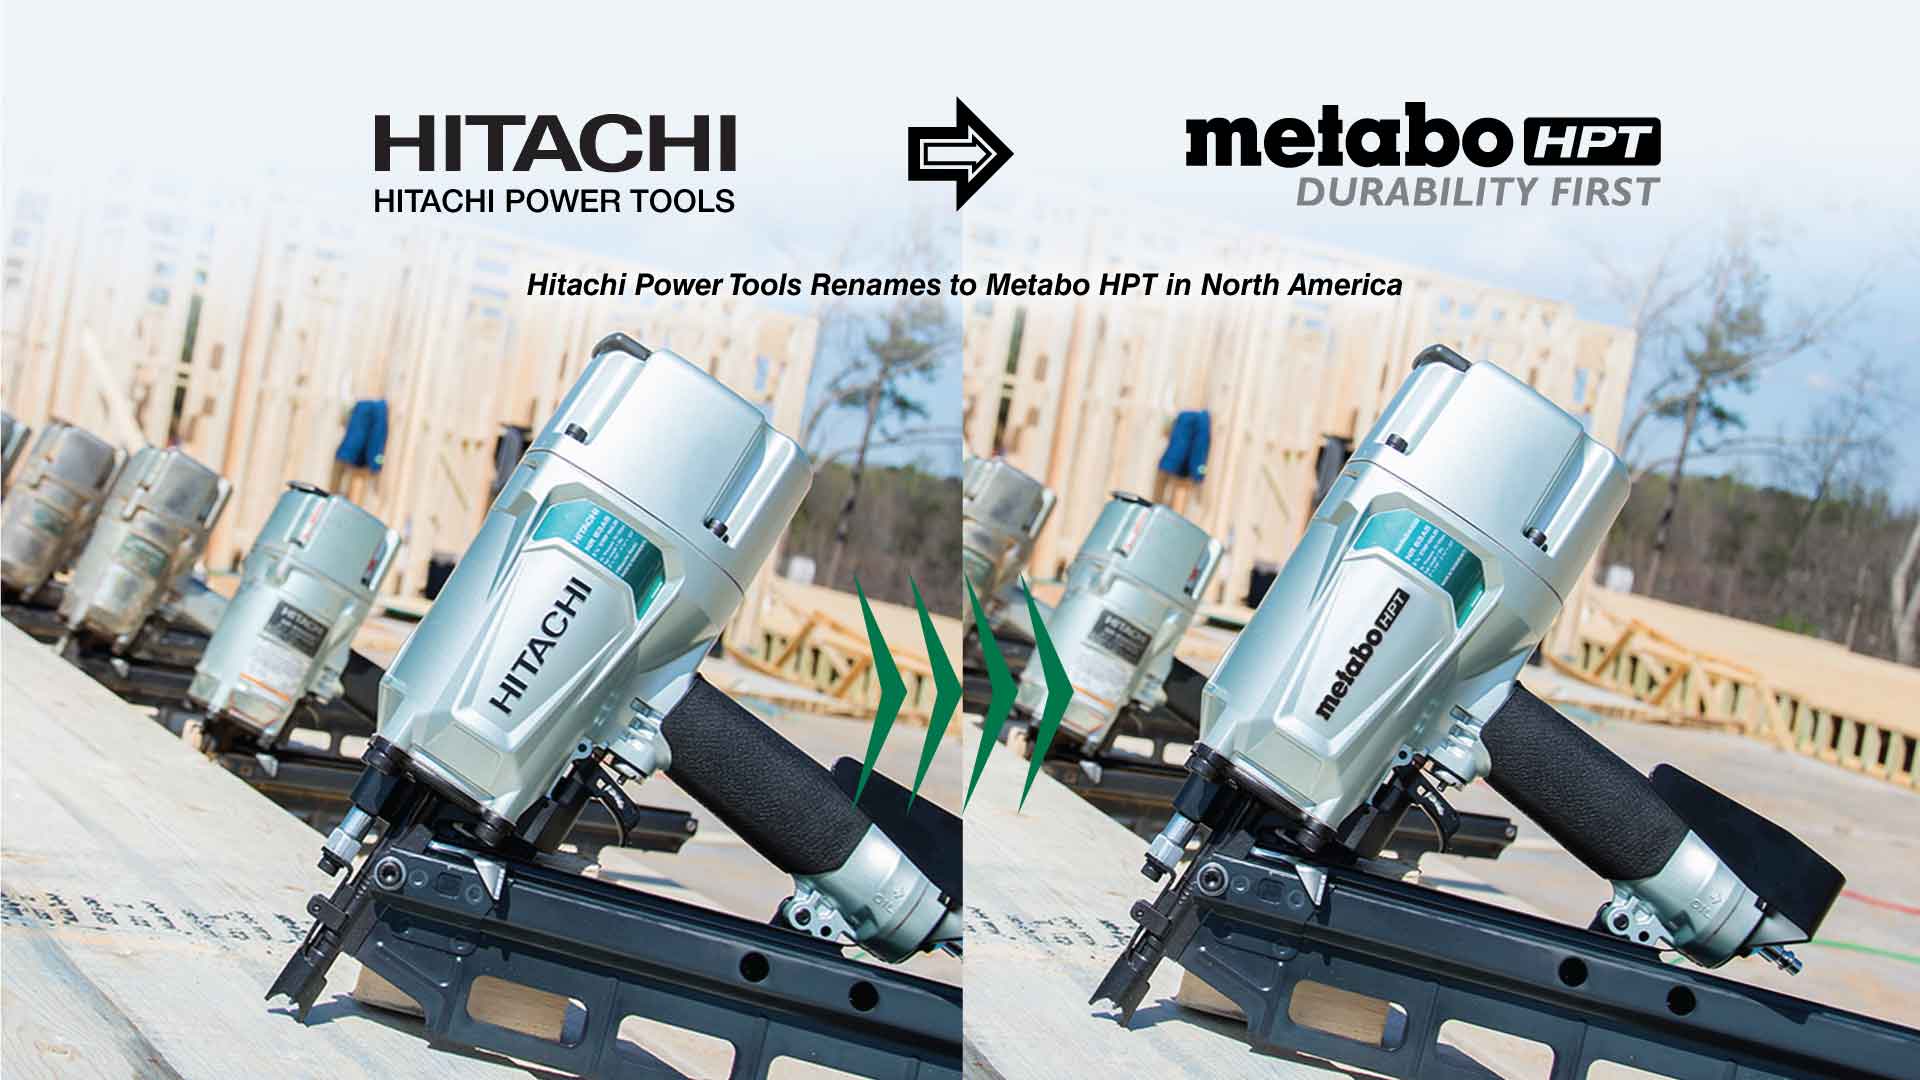 Hitachi Power Tools Renames to Metabo HPT in North America